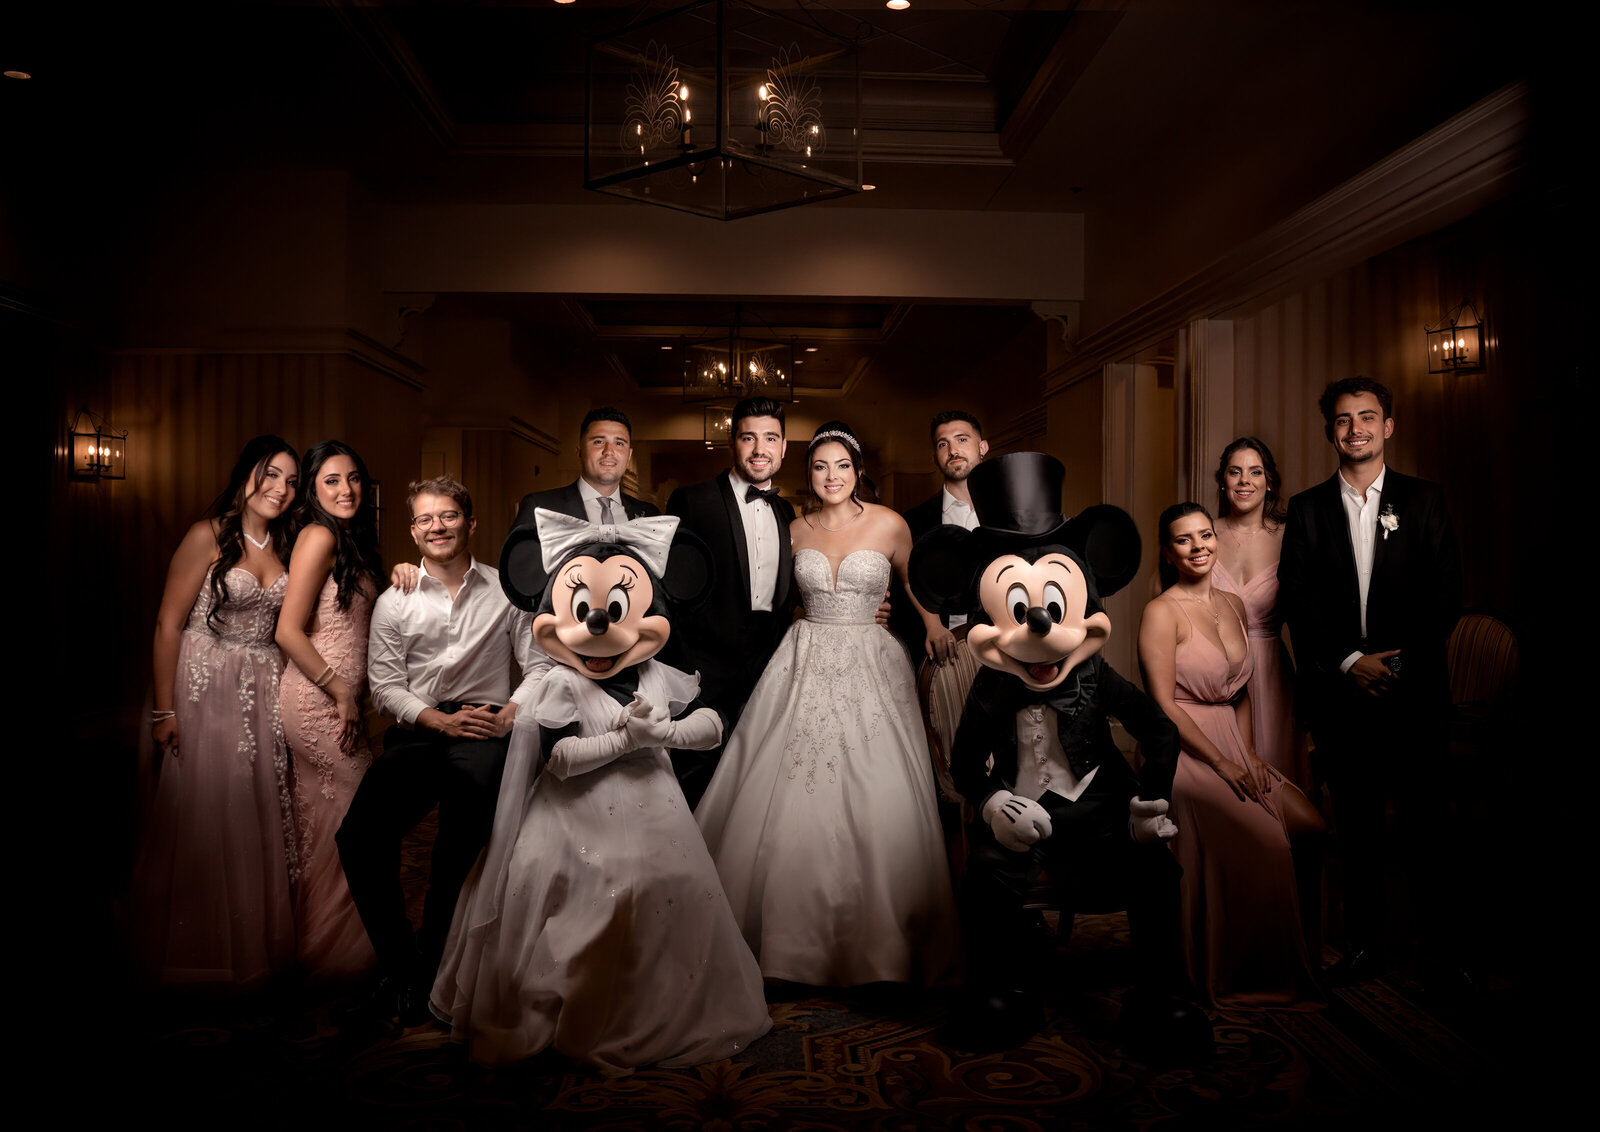 Make your fairy tale dreams a reality with our magical photography services at Disney World. Let us preserve every enchanting moment of your special day amidst the splendor of the happiest place on earth.